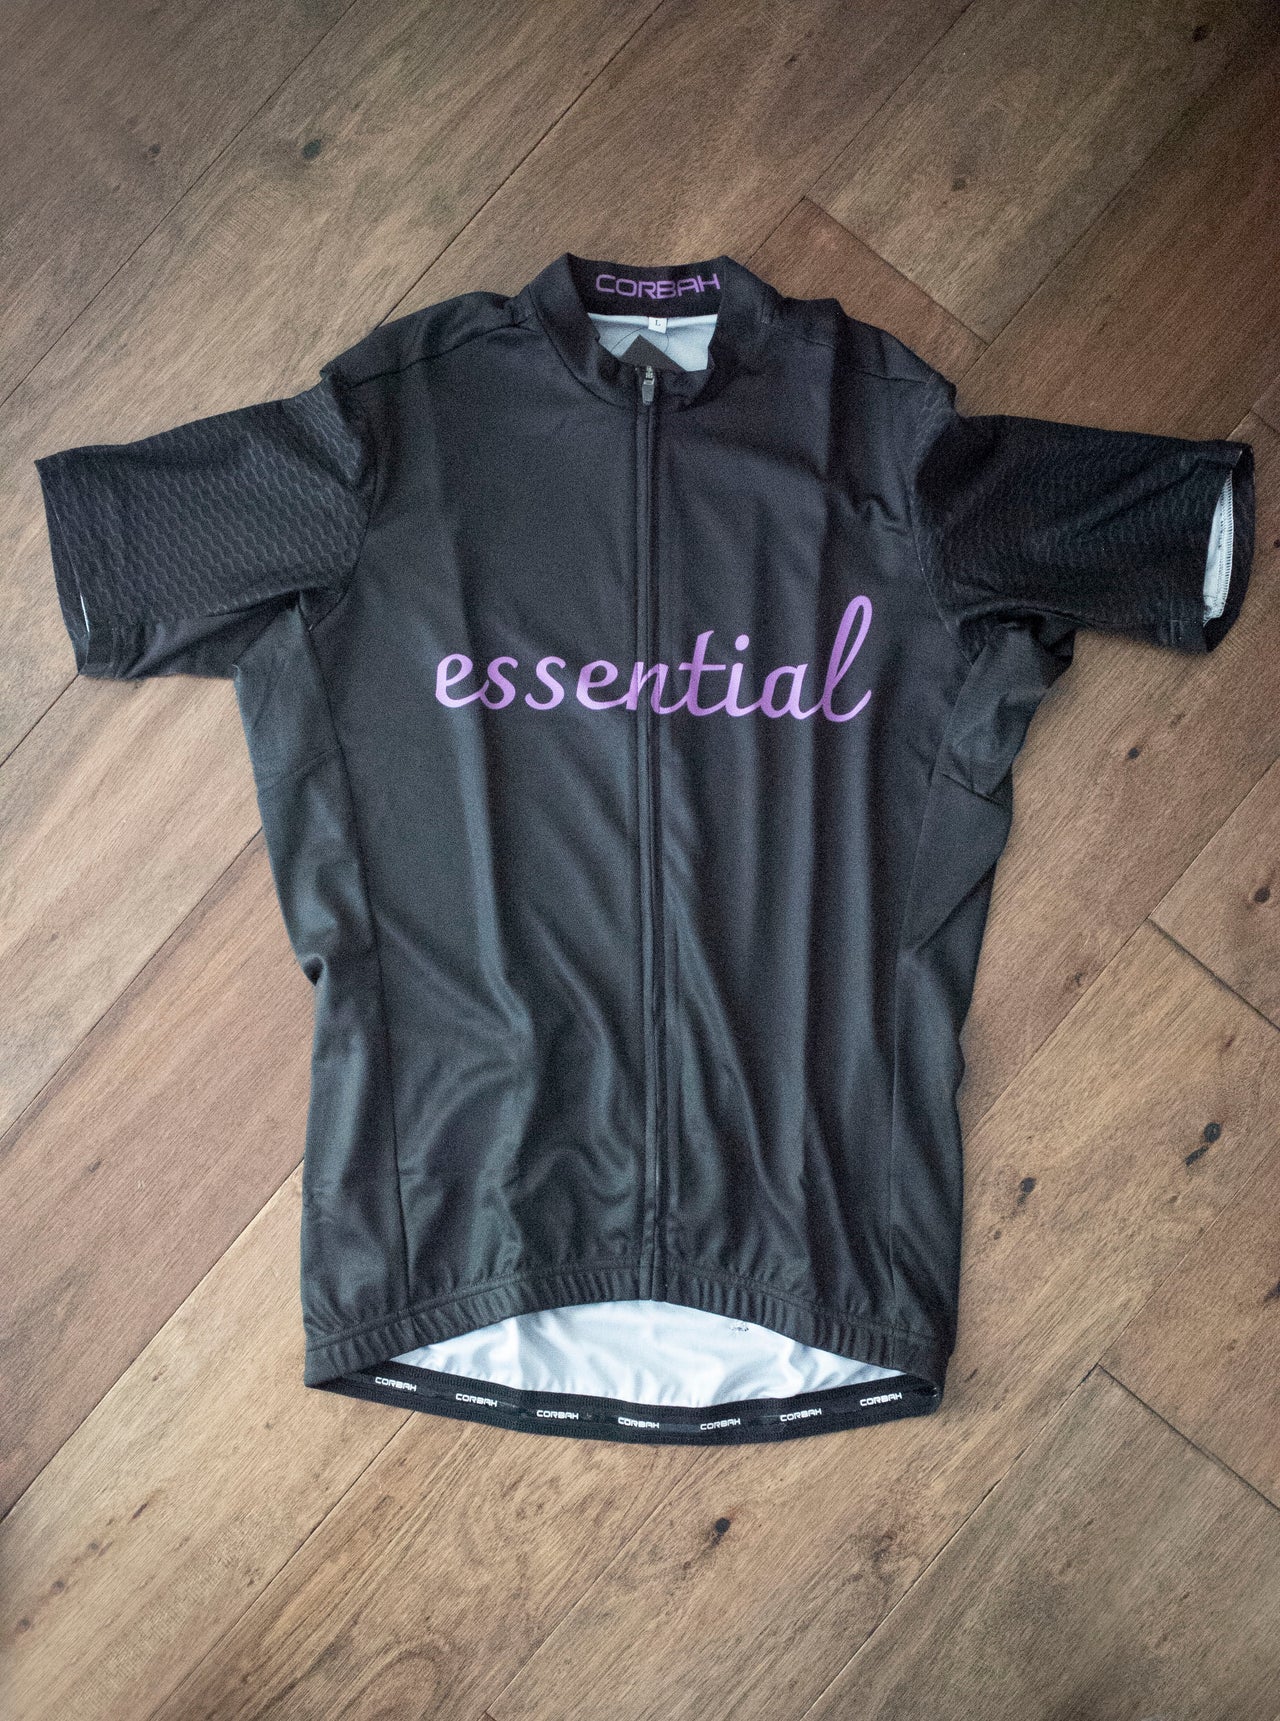 Essential Grey and Purple Short Sleeve Cycling Jersey corbah